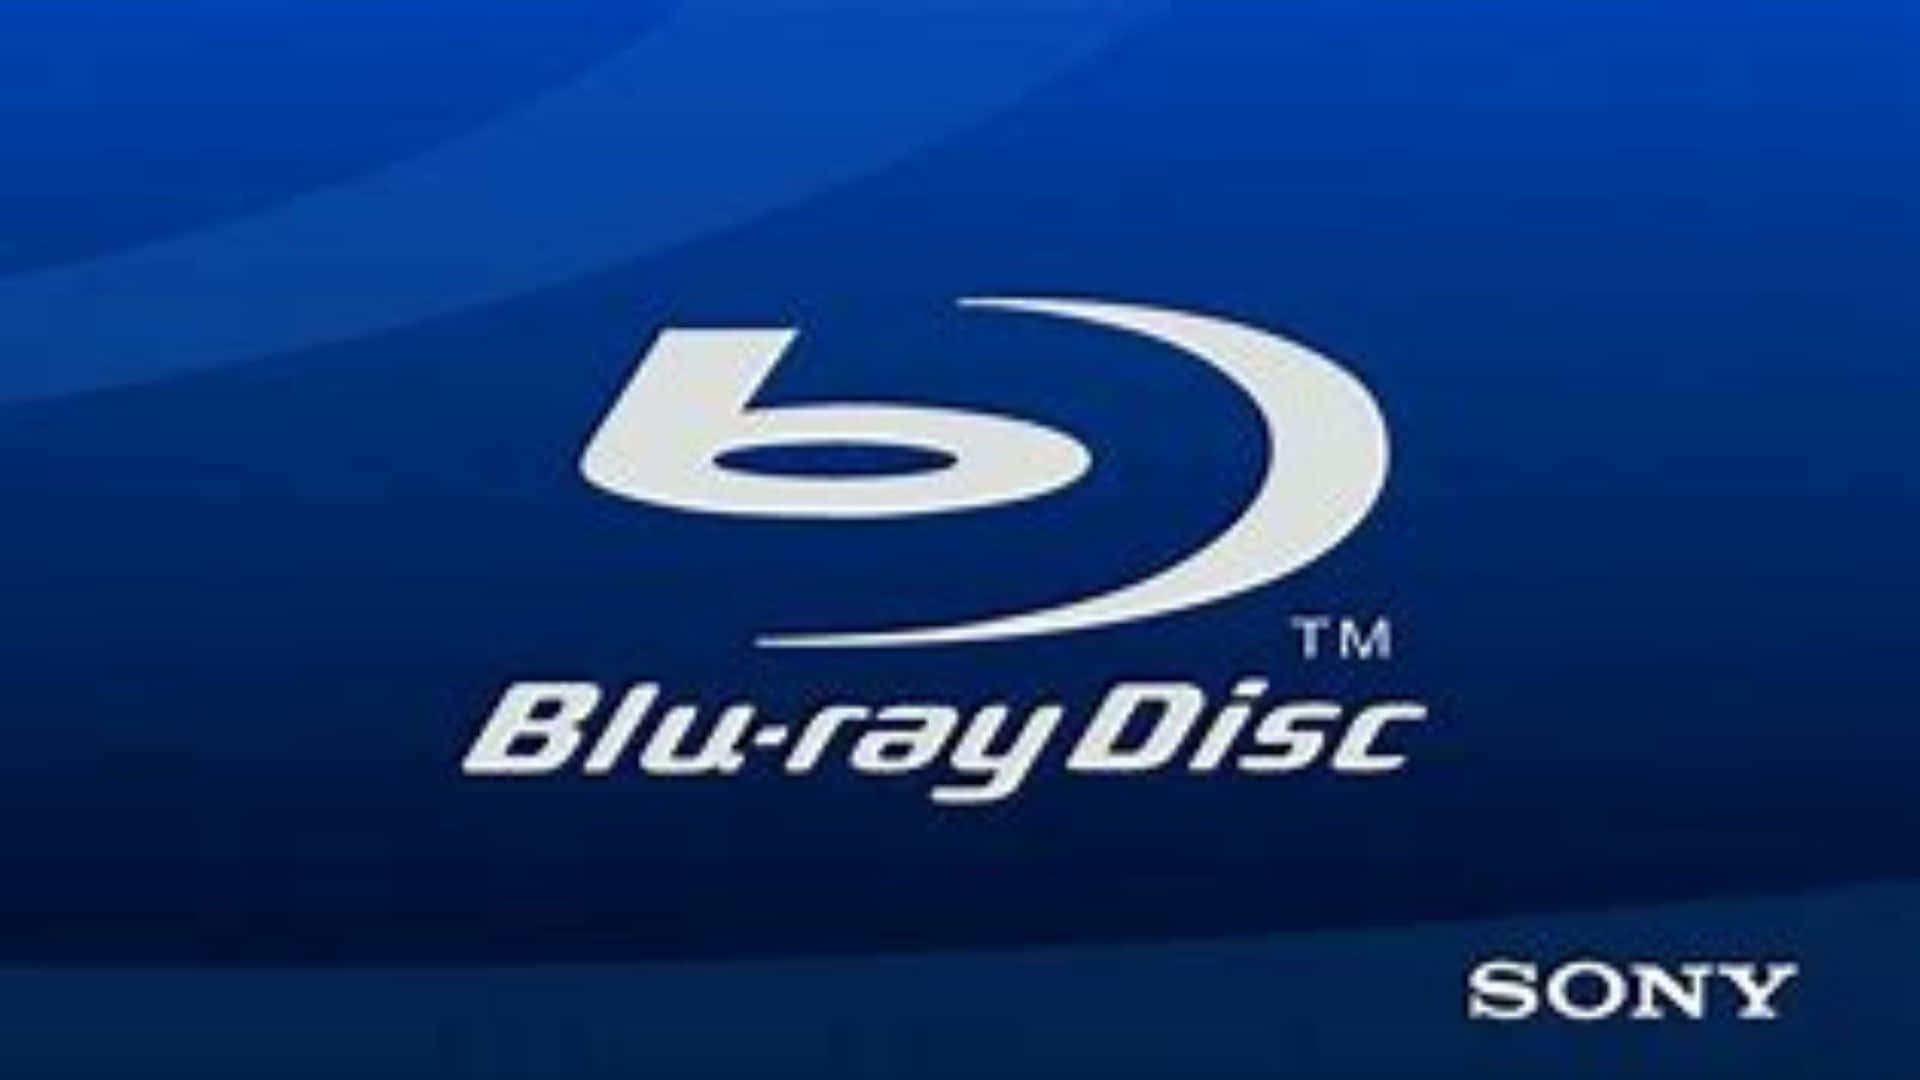 Collection of 4K Ultra HD Blu-ray discs on a shelf Wallpaper